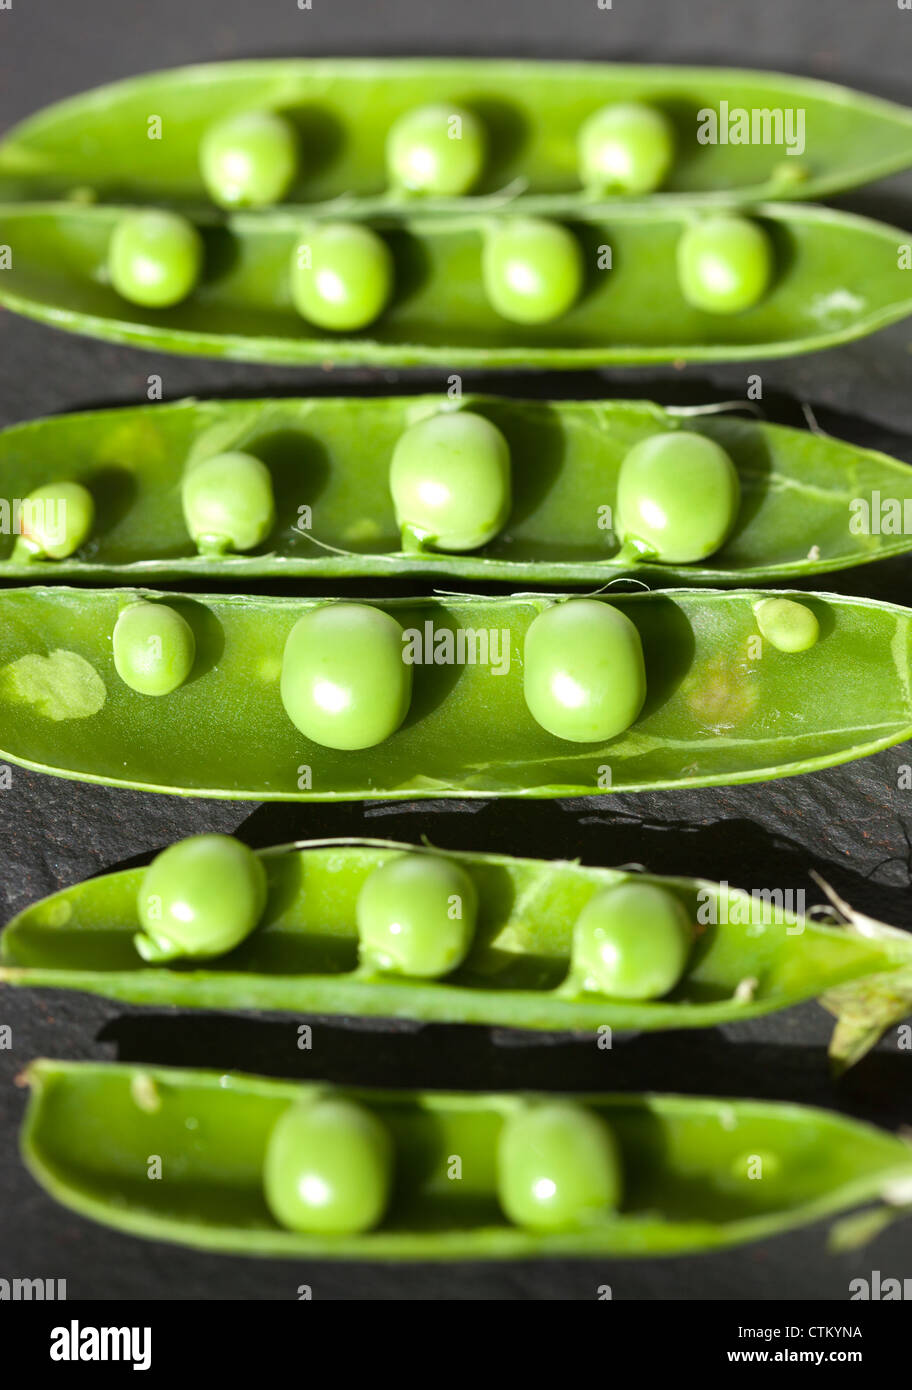 Green Peas in pods Stock Photo